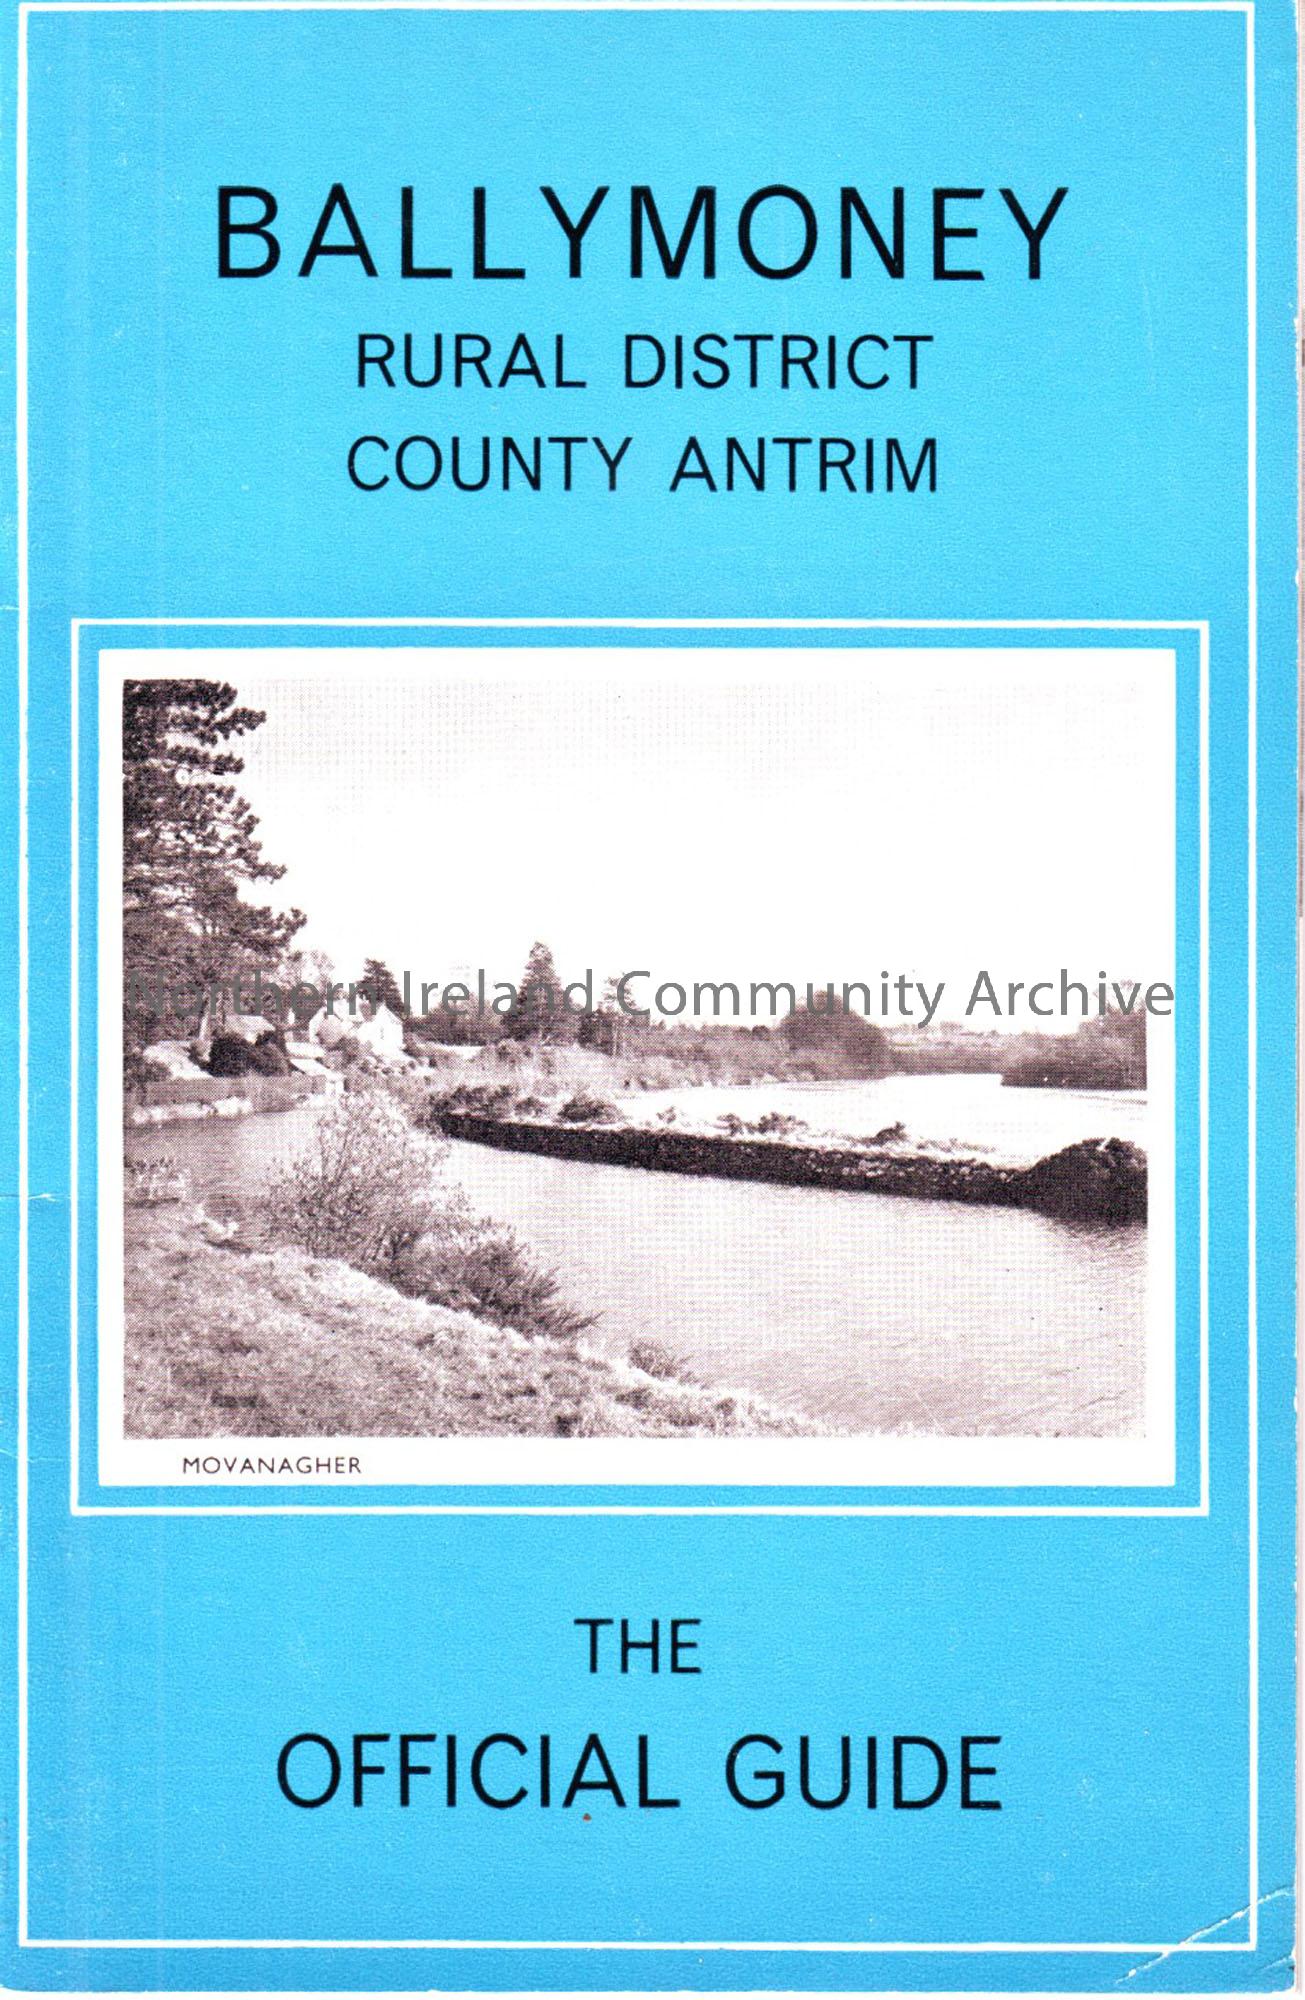 Ballymoney, Rural District, County Antrim, The Official Guide published by the Authority of the Ballymoney Rural District Council